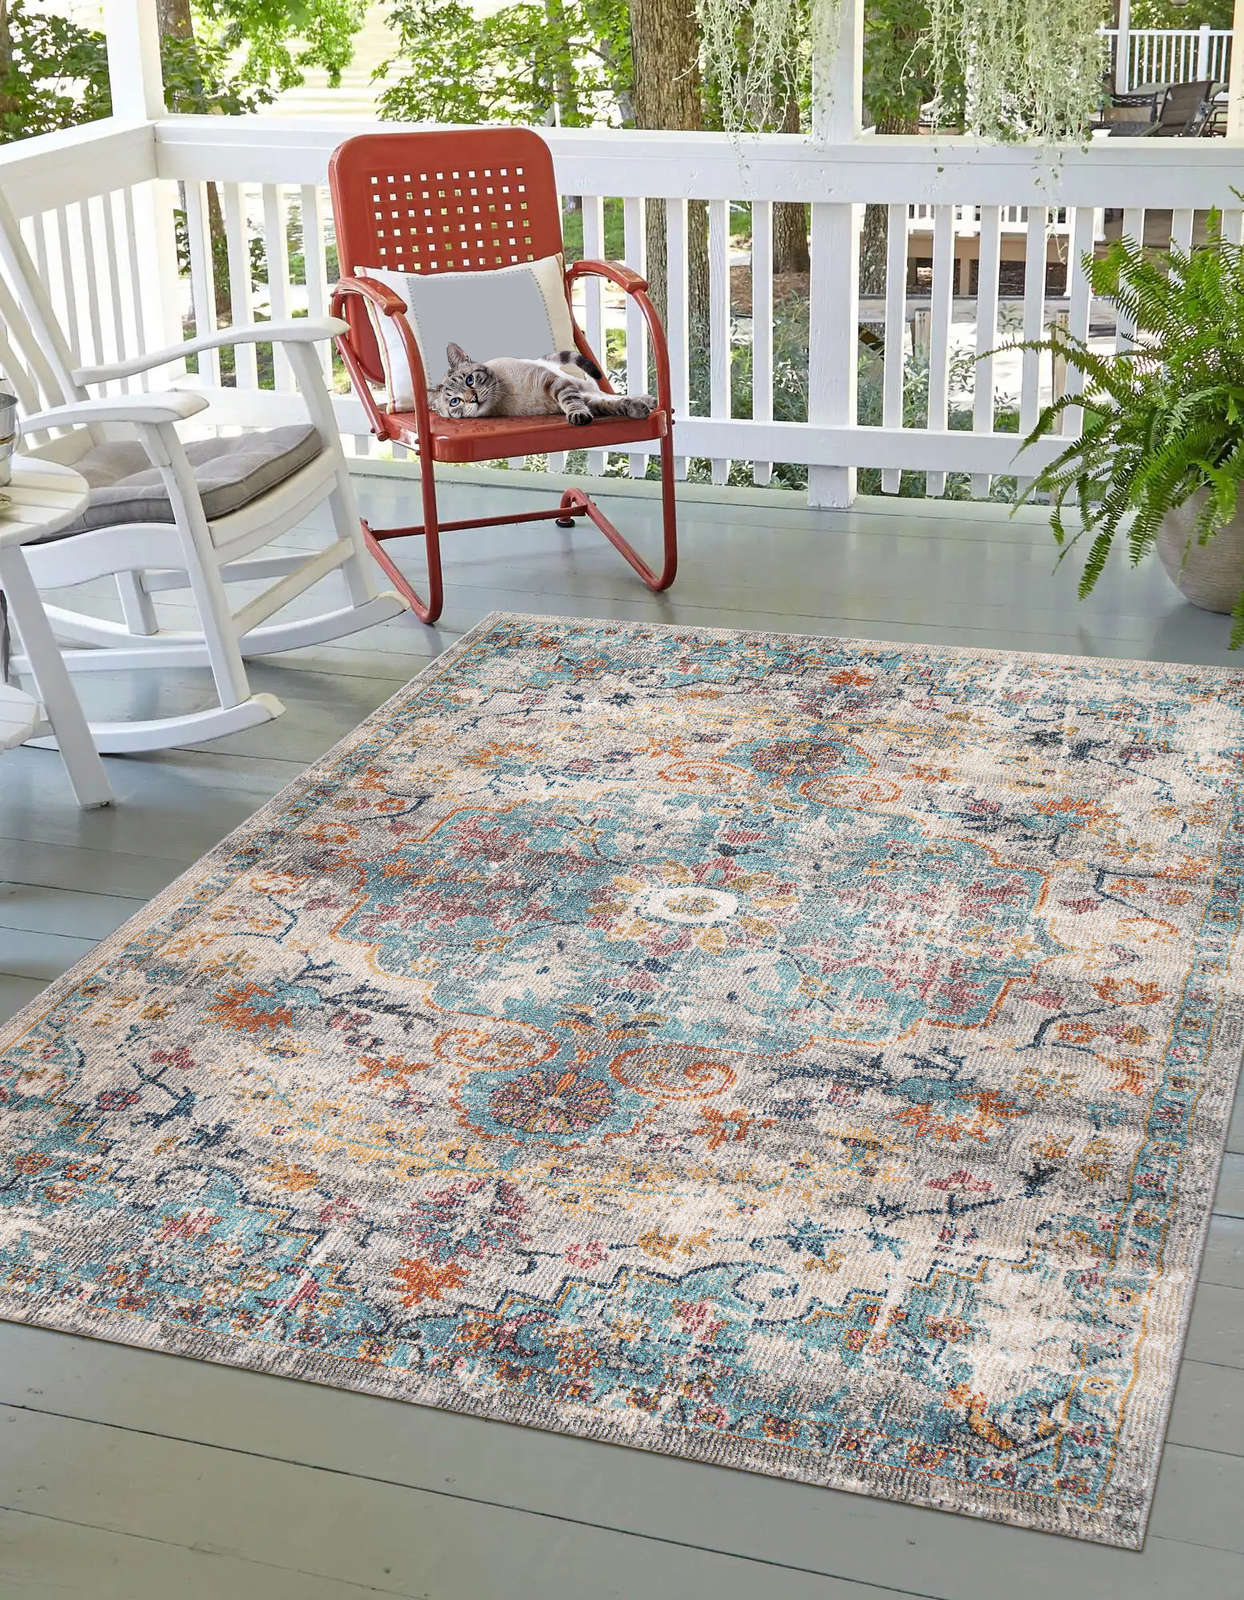             Easy Care Outdoor Rug Colourful - 290 x 200 cm
        